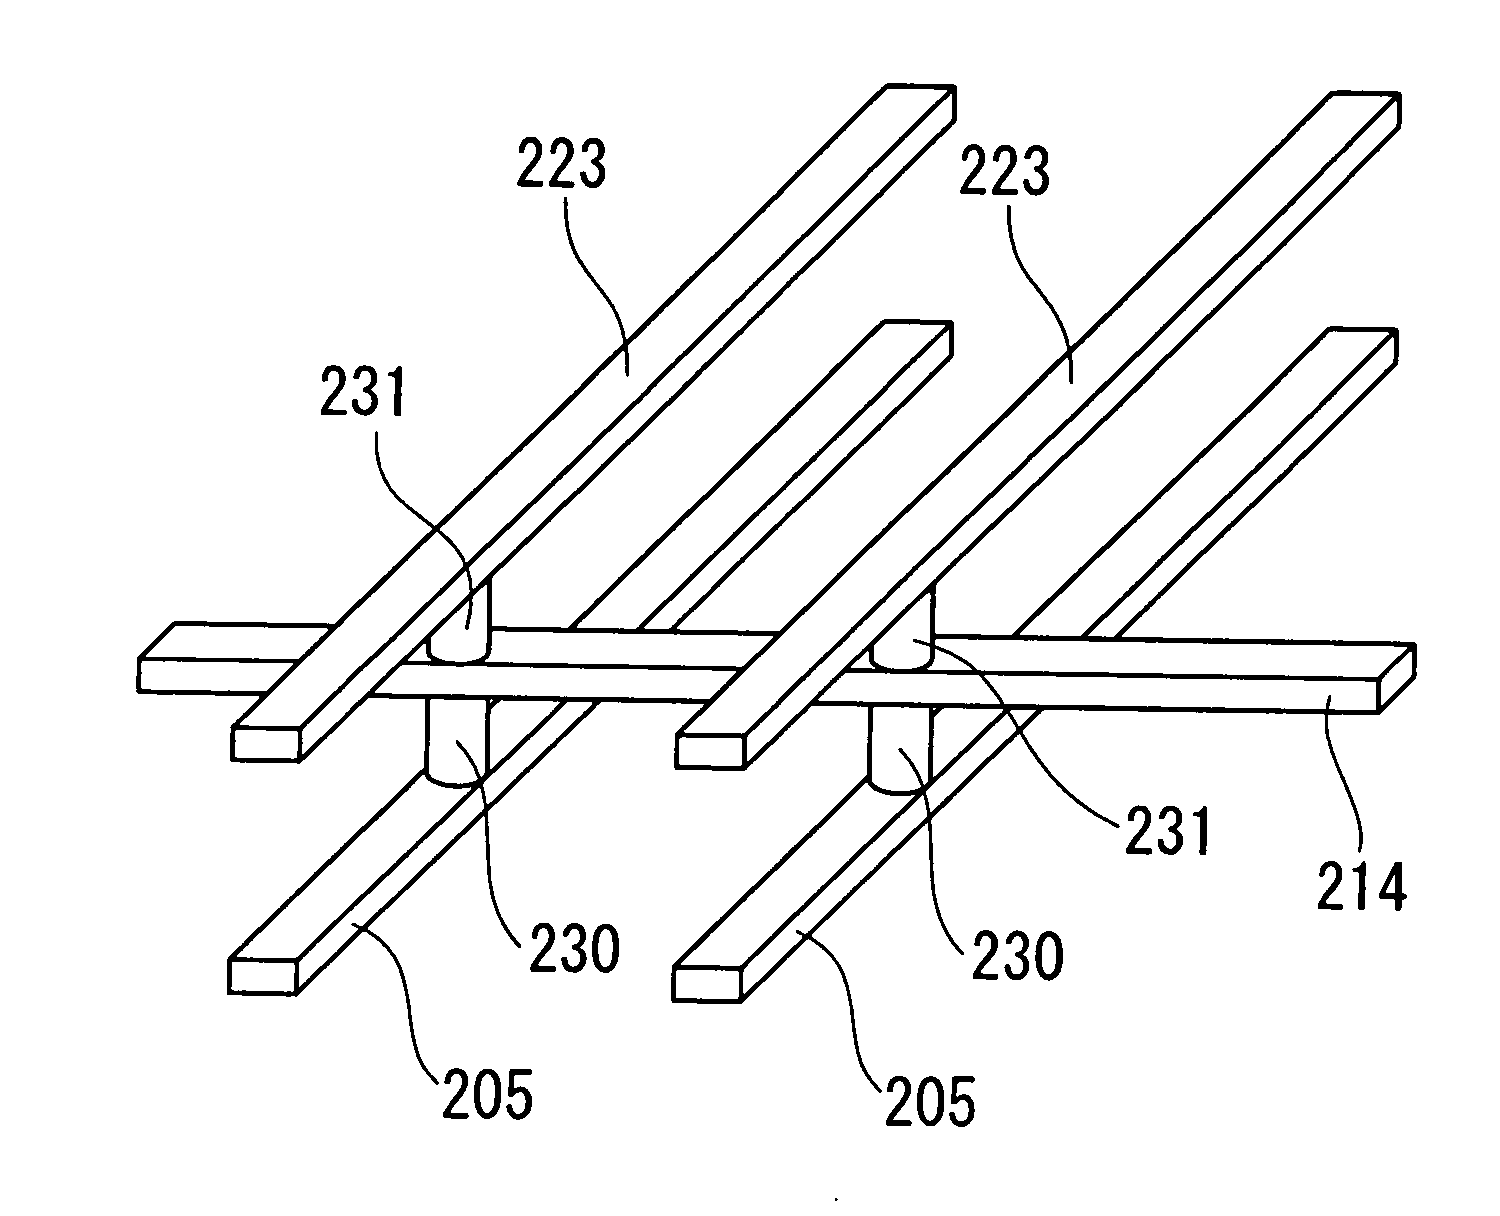 Semiconductor storage device and method of manufacturing the same